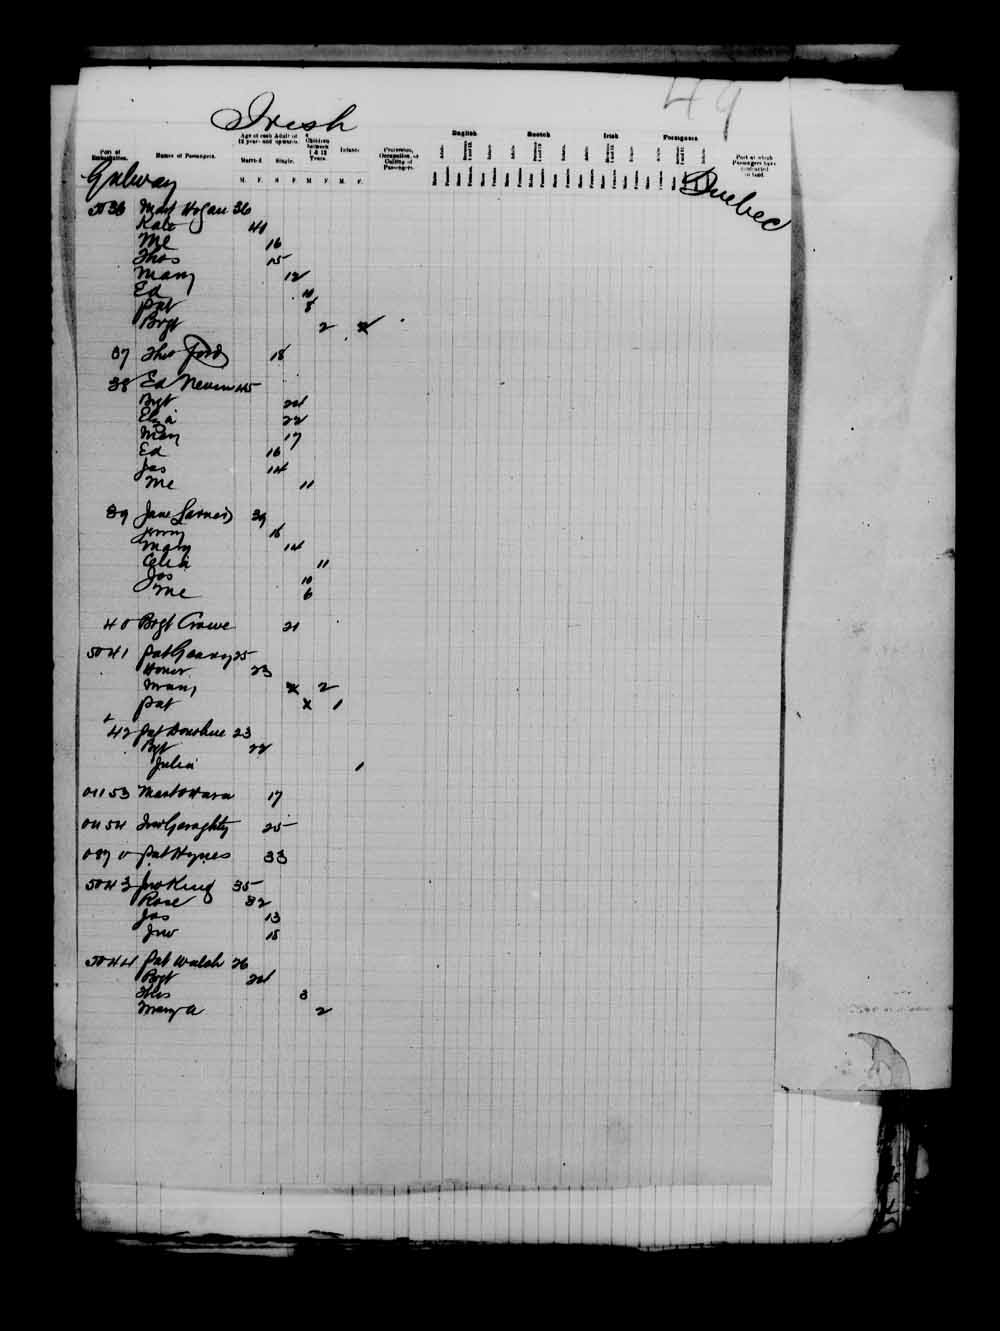 Digitized page of Passenger Lists for Image No.: e003543412